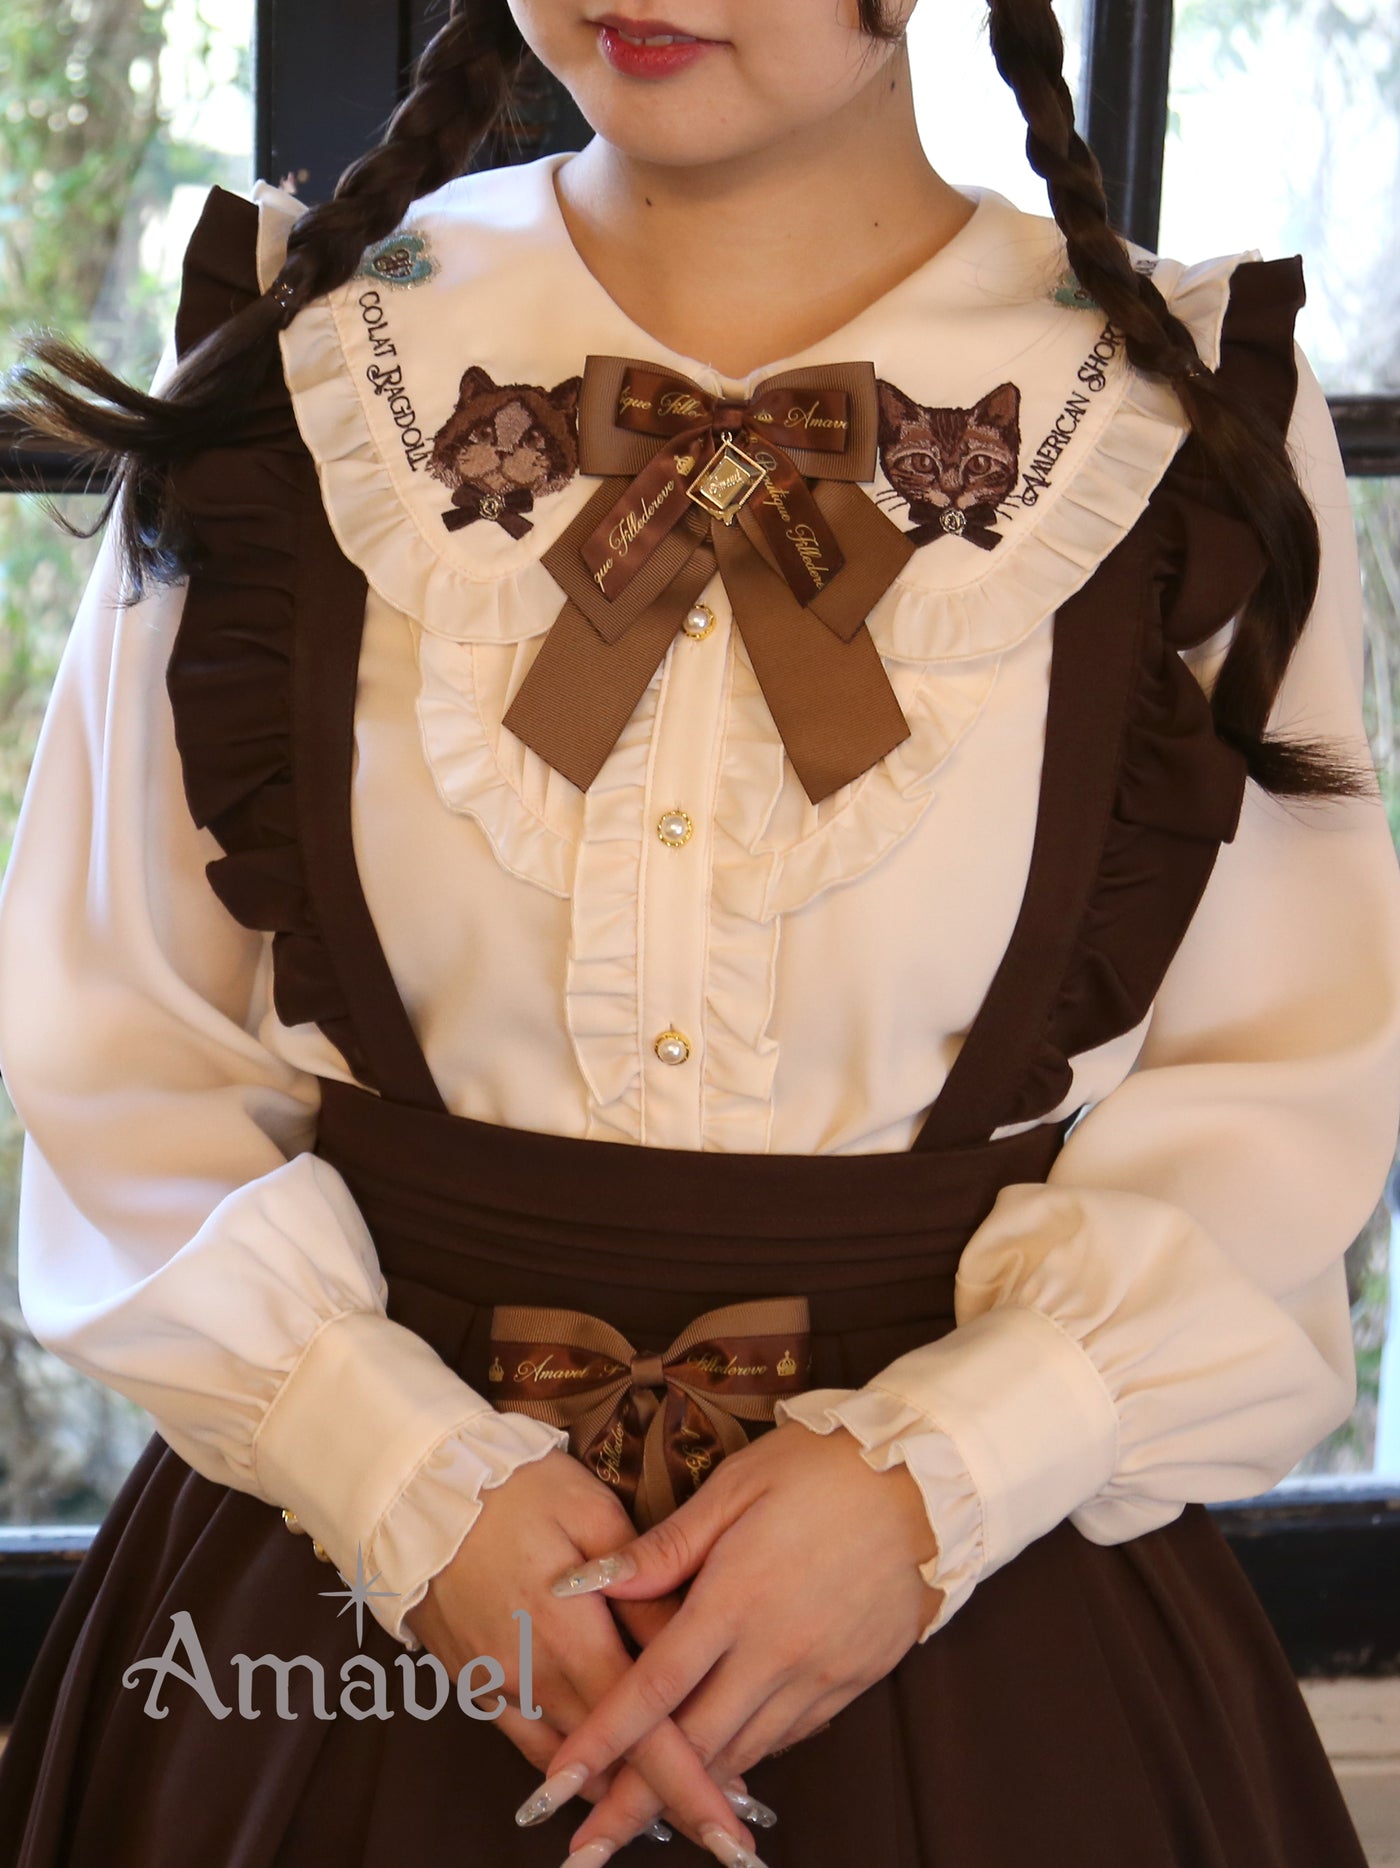 Chocolat Chat Delicious blouse